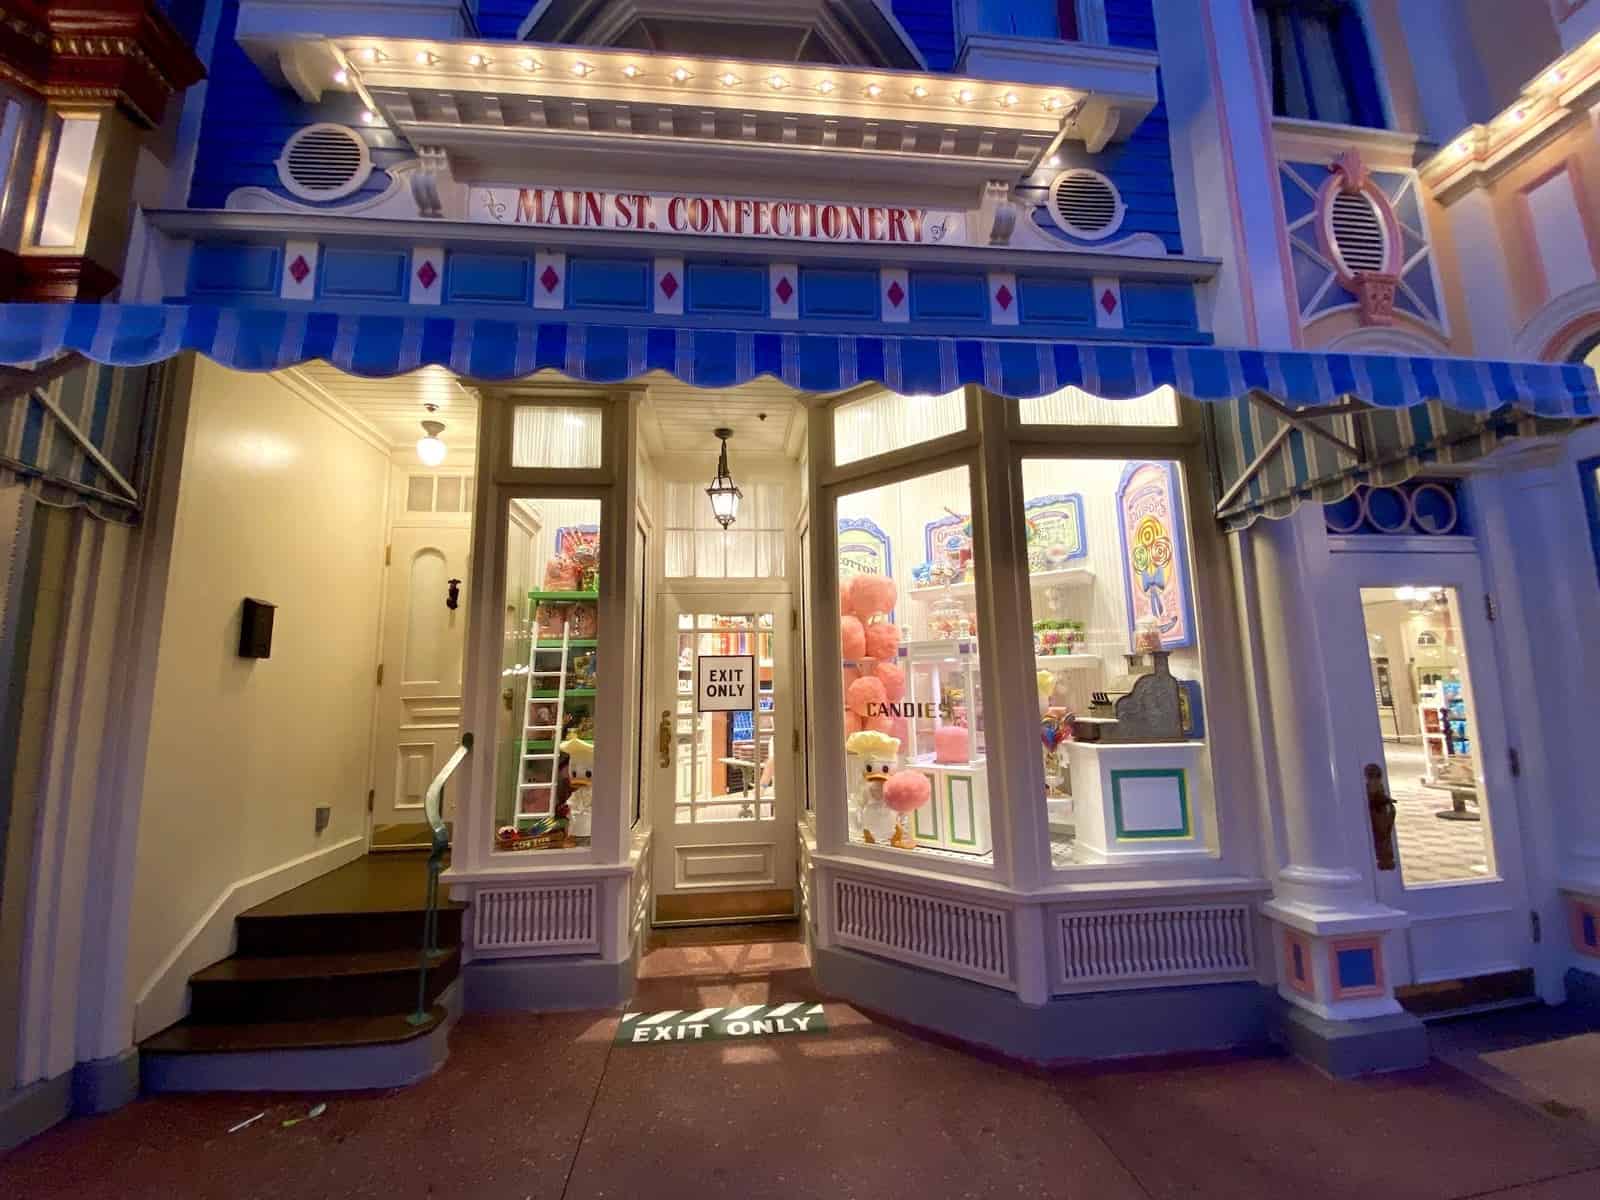 Disney World Adding Mobile Order To Main Street Confectionery & More